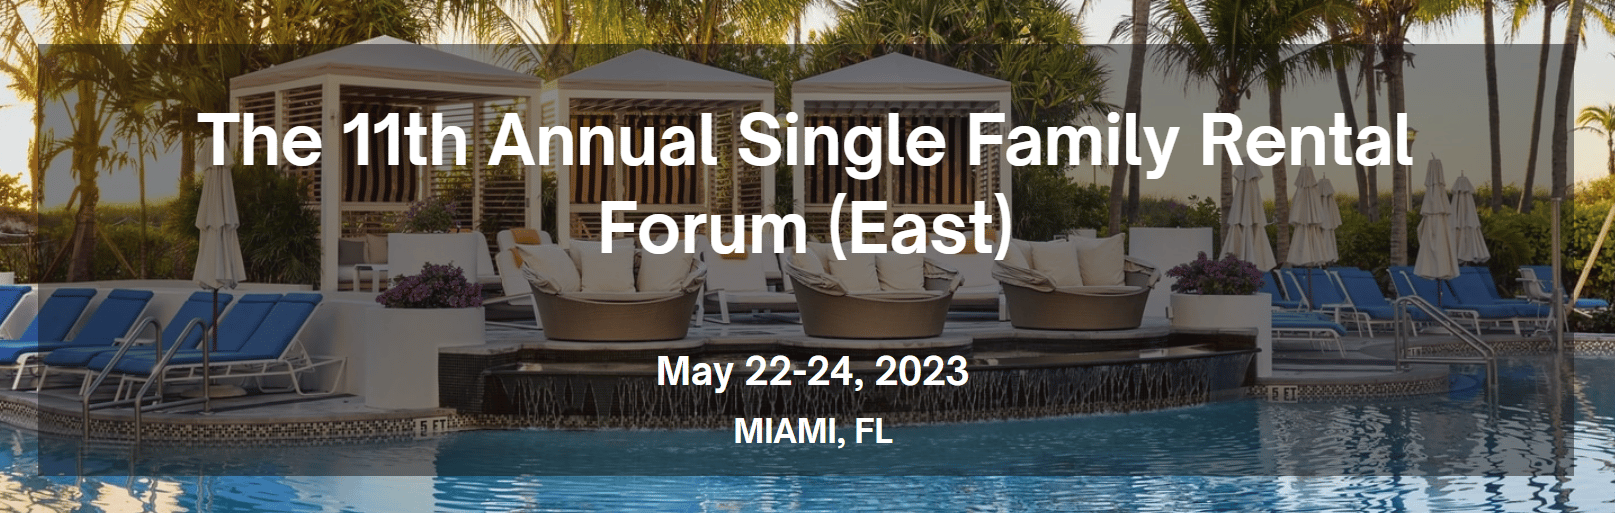 The 11th Annual Single Family Rental Forum (East)